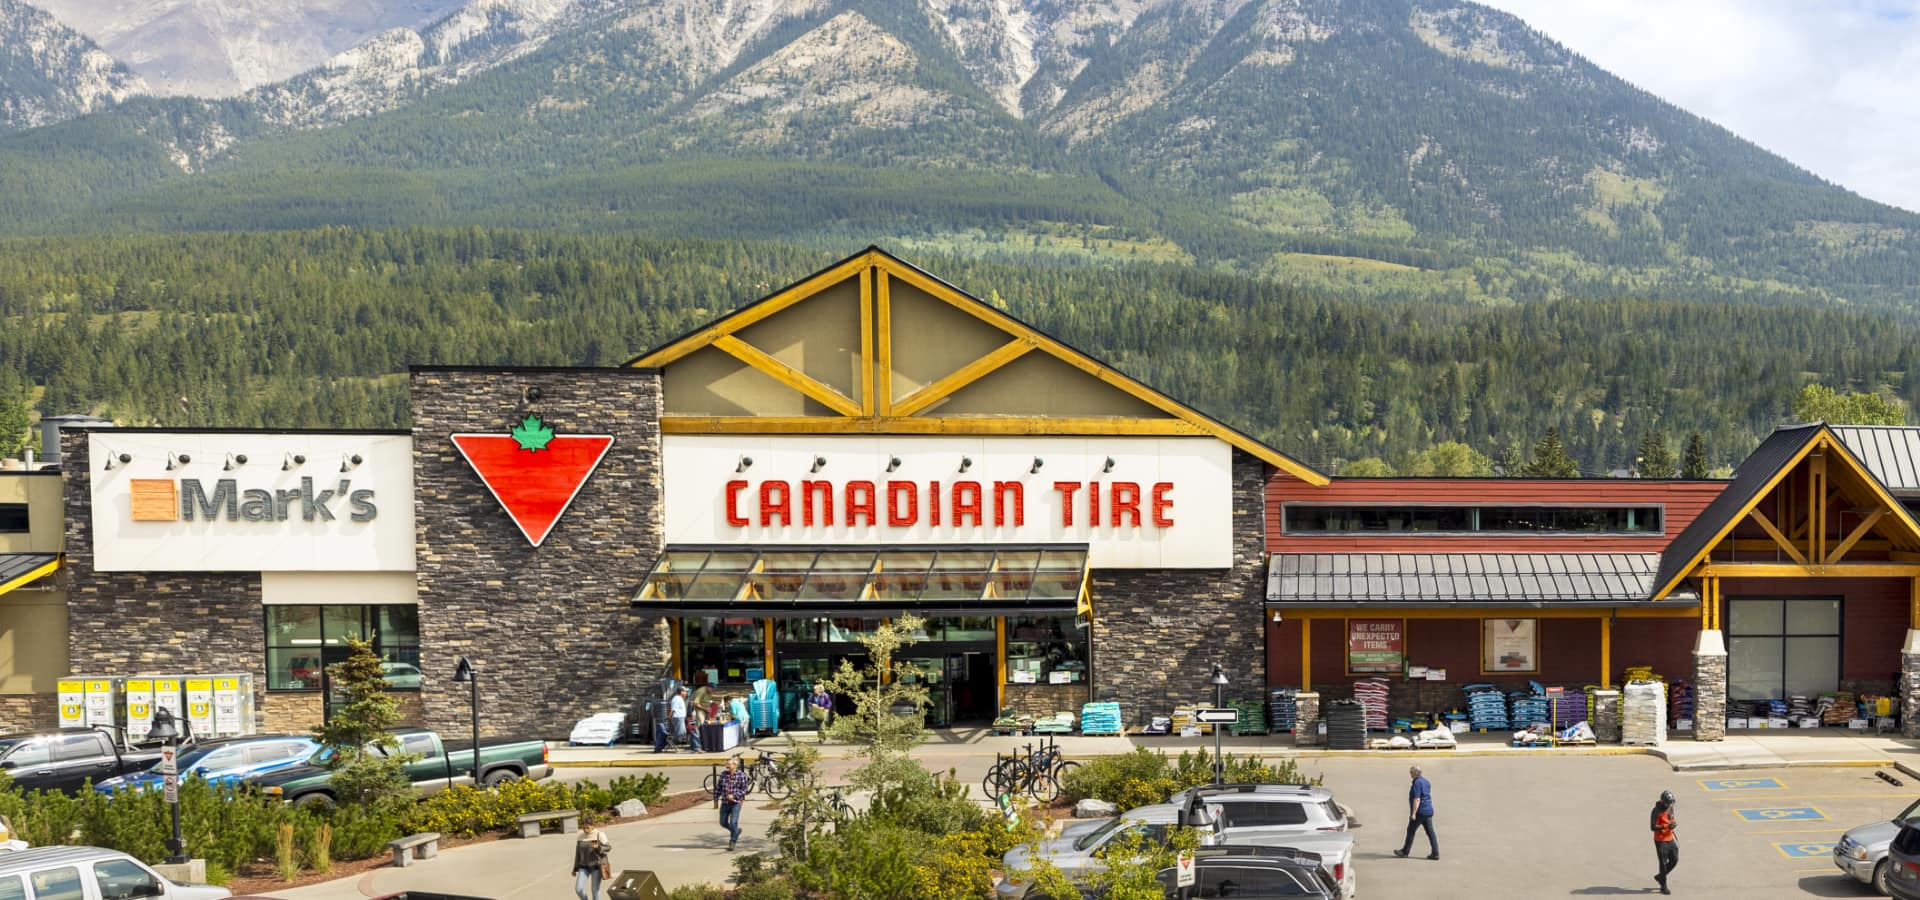 A Canadian Tire and Mark’s store side by side in a mountainous landscape in Canmore, Alberta.